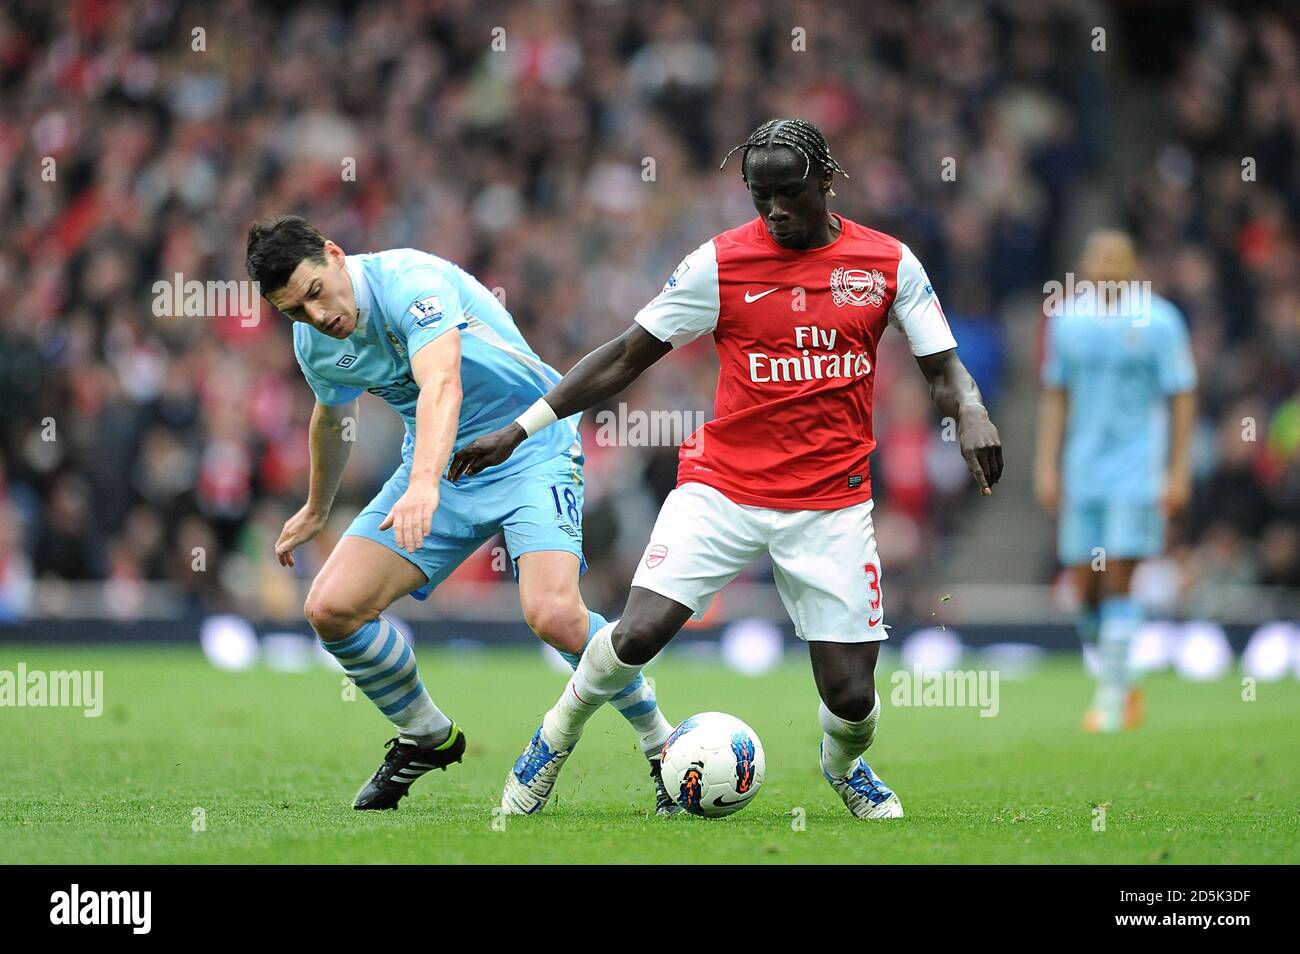 Arsenal's Bacary Sagna (right) and Manchester City's Gareth Barry (left) battle for the ball Stock Photo